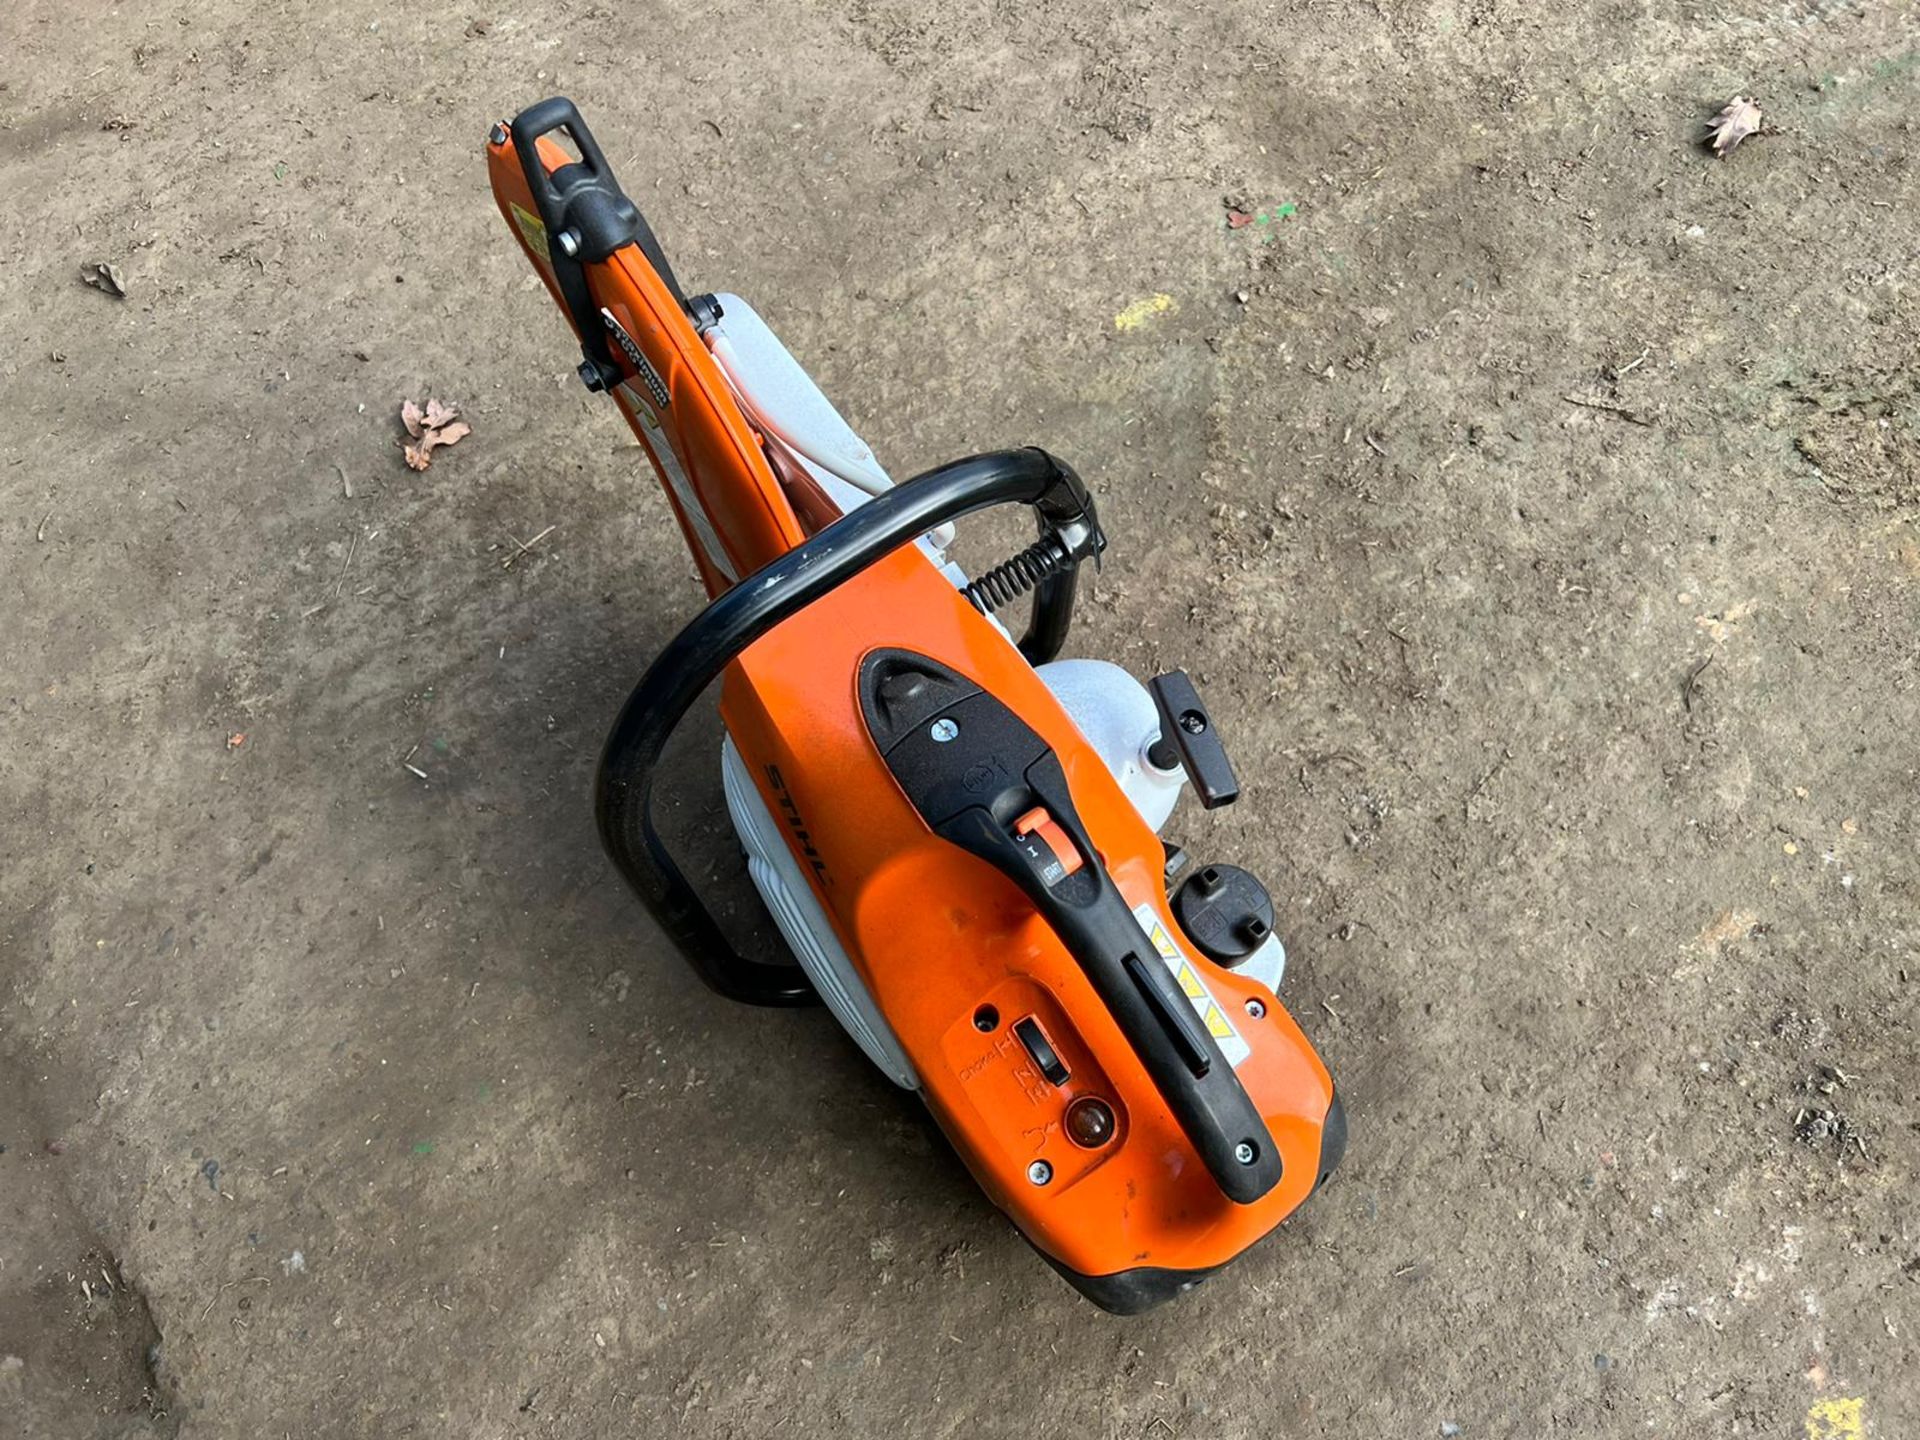 NEW AND UNUSED STIHL TS410 PETROL DISC CUTTER, MANUFACTURED 11/2021, C/W NEW 12" DIAMOND BLADE - Image 5 of 8